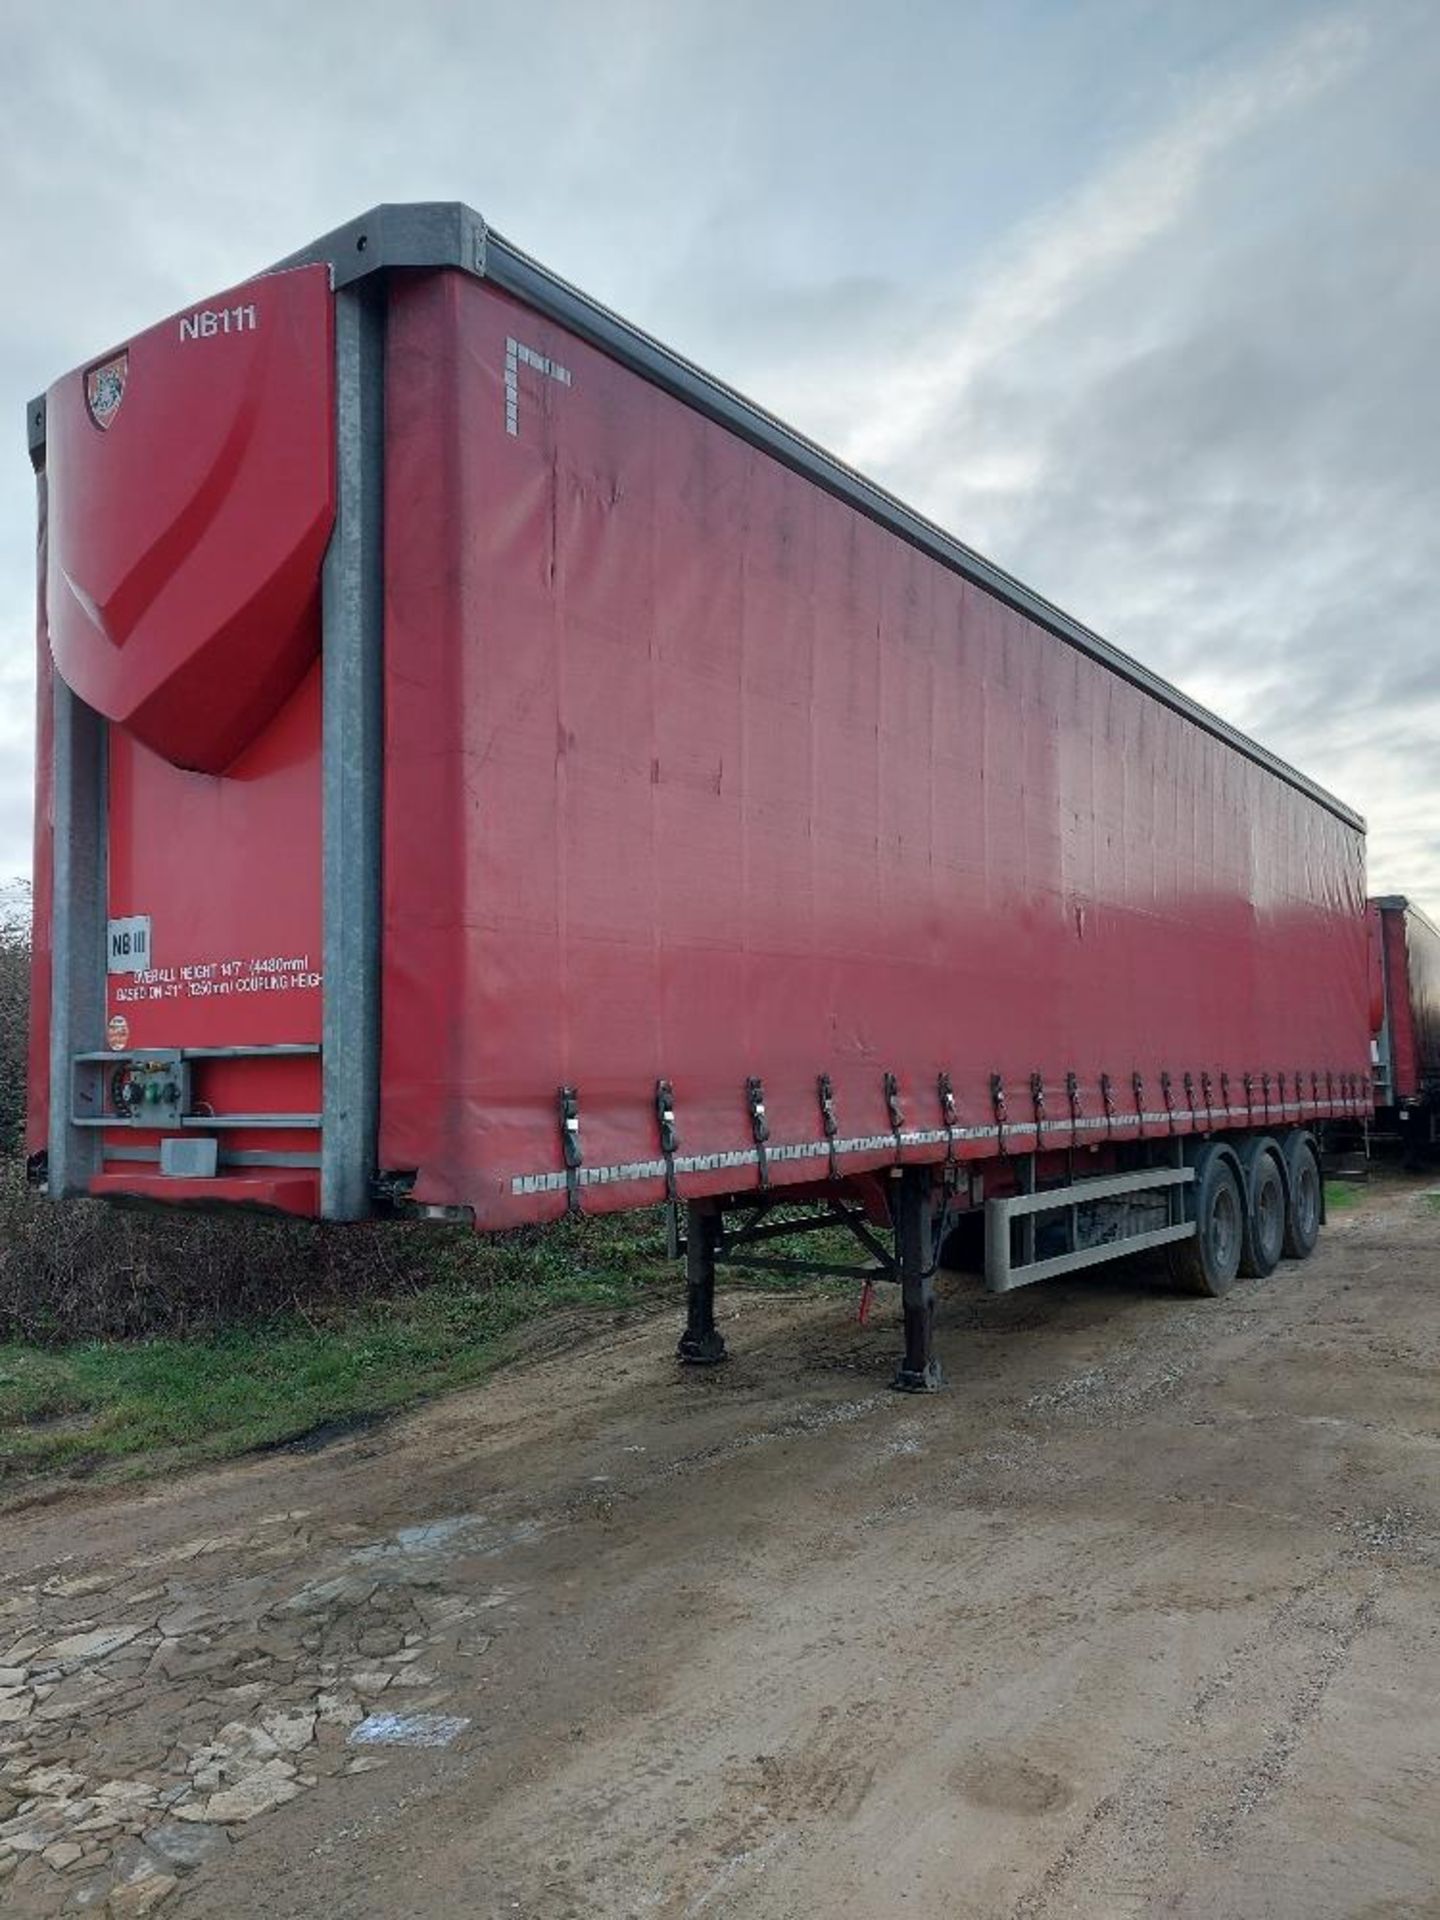 Tiger Tri-Axle 13.7m Curtain Side Trailer Unit - Image 2 of 8